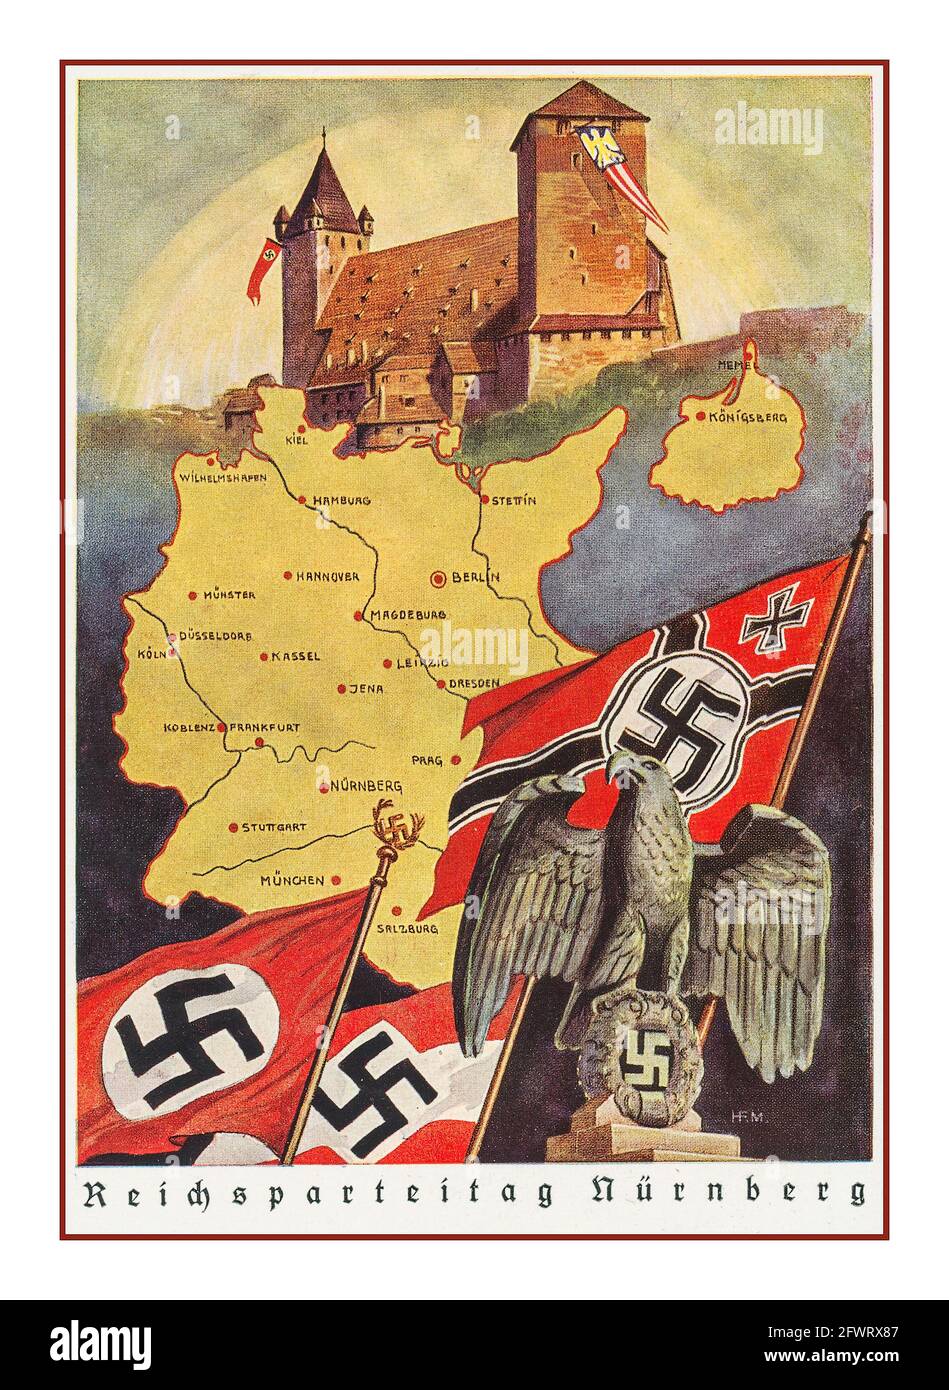 1930's Nazi Propaganda Poster Card REICHSPARTEITAG NURNBERG, with map of Nazi Germany with Swastika Flags German Eagle and Nuremberg Nurnberg Castle Stock Photo